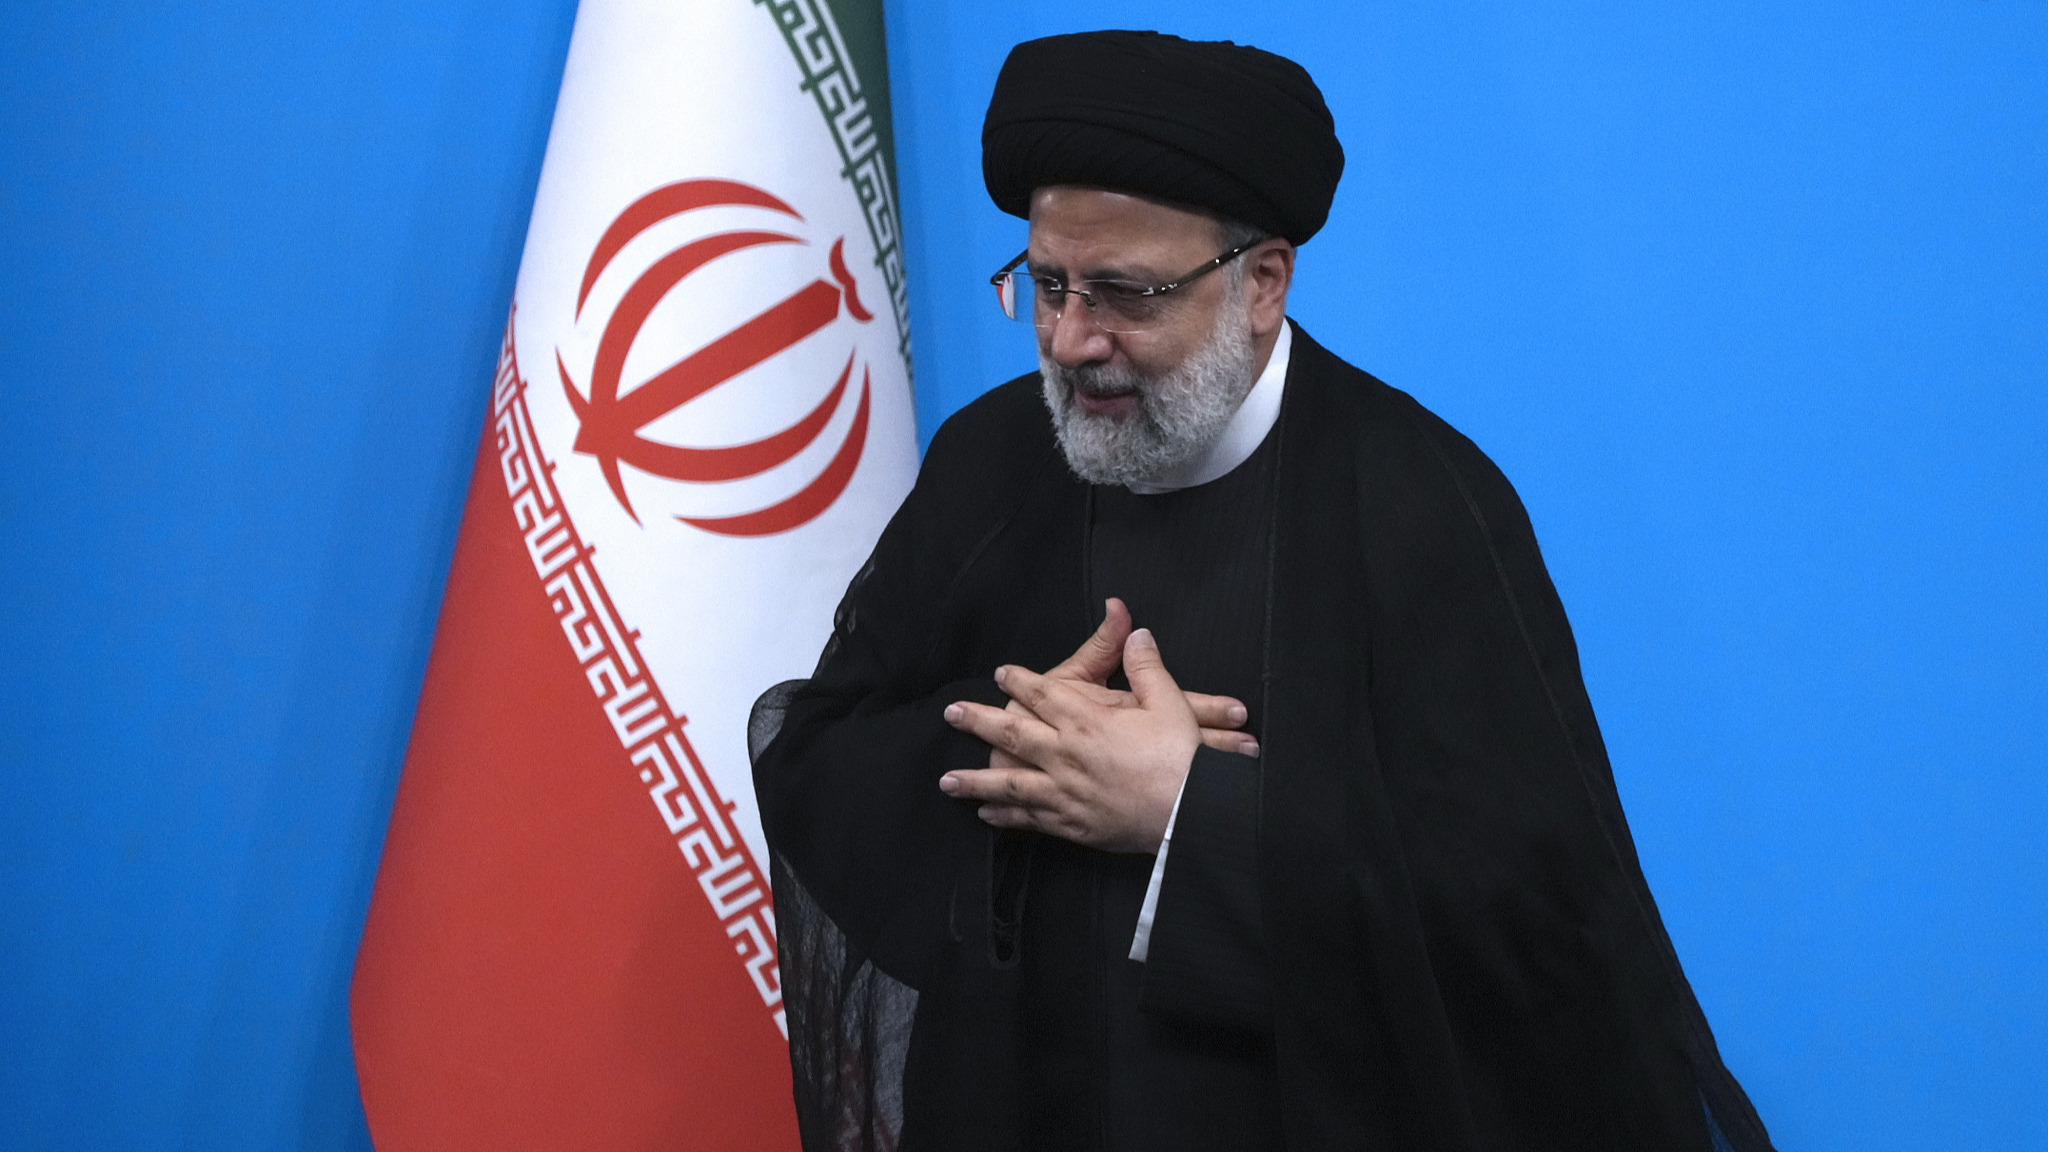 Iranian President Ebrahim Raisi places his hands on his heart as a gesture of respect as he leaves after the conclusion of a news conference in Tehran, Iran, August 29, 2023. /CFP